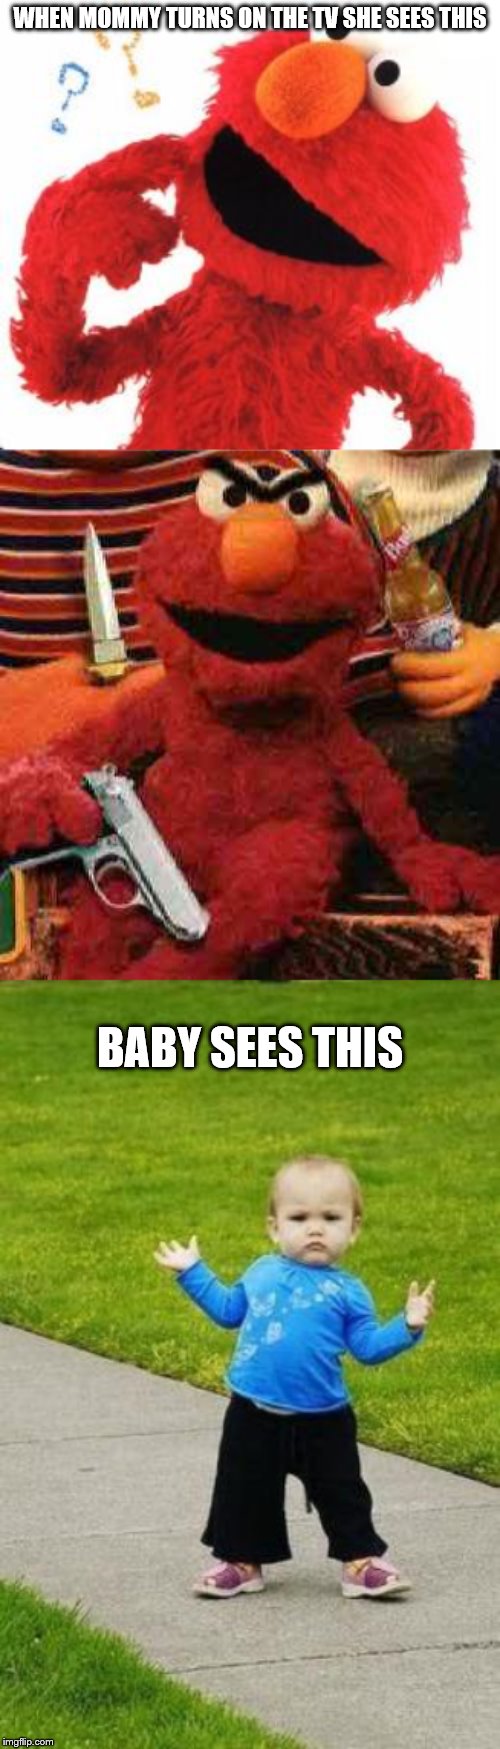 WHEN MOMMY TURNS ON THE TV SHE SEES THIS; BABY SEES THIS | image tagged in gangsta elmo,gangsta baby,elmo questions | made w/ Imgflip meme maker